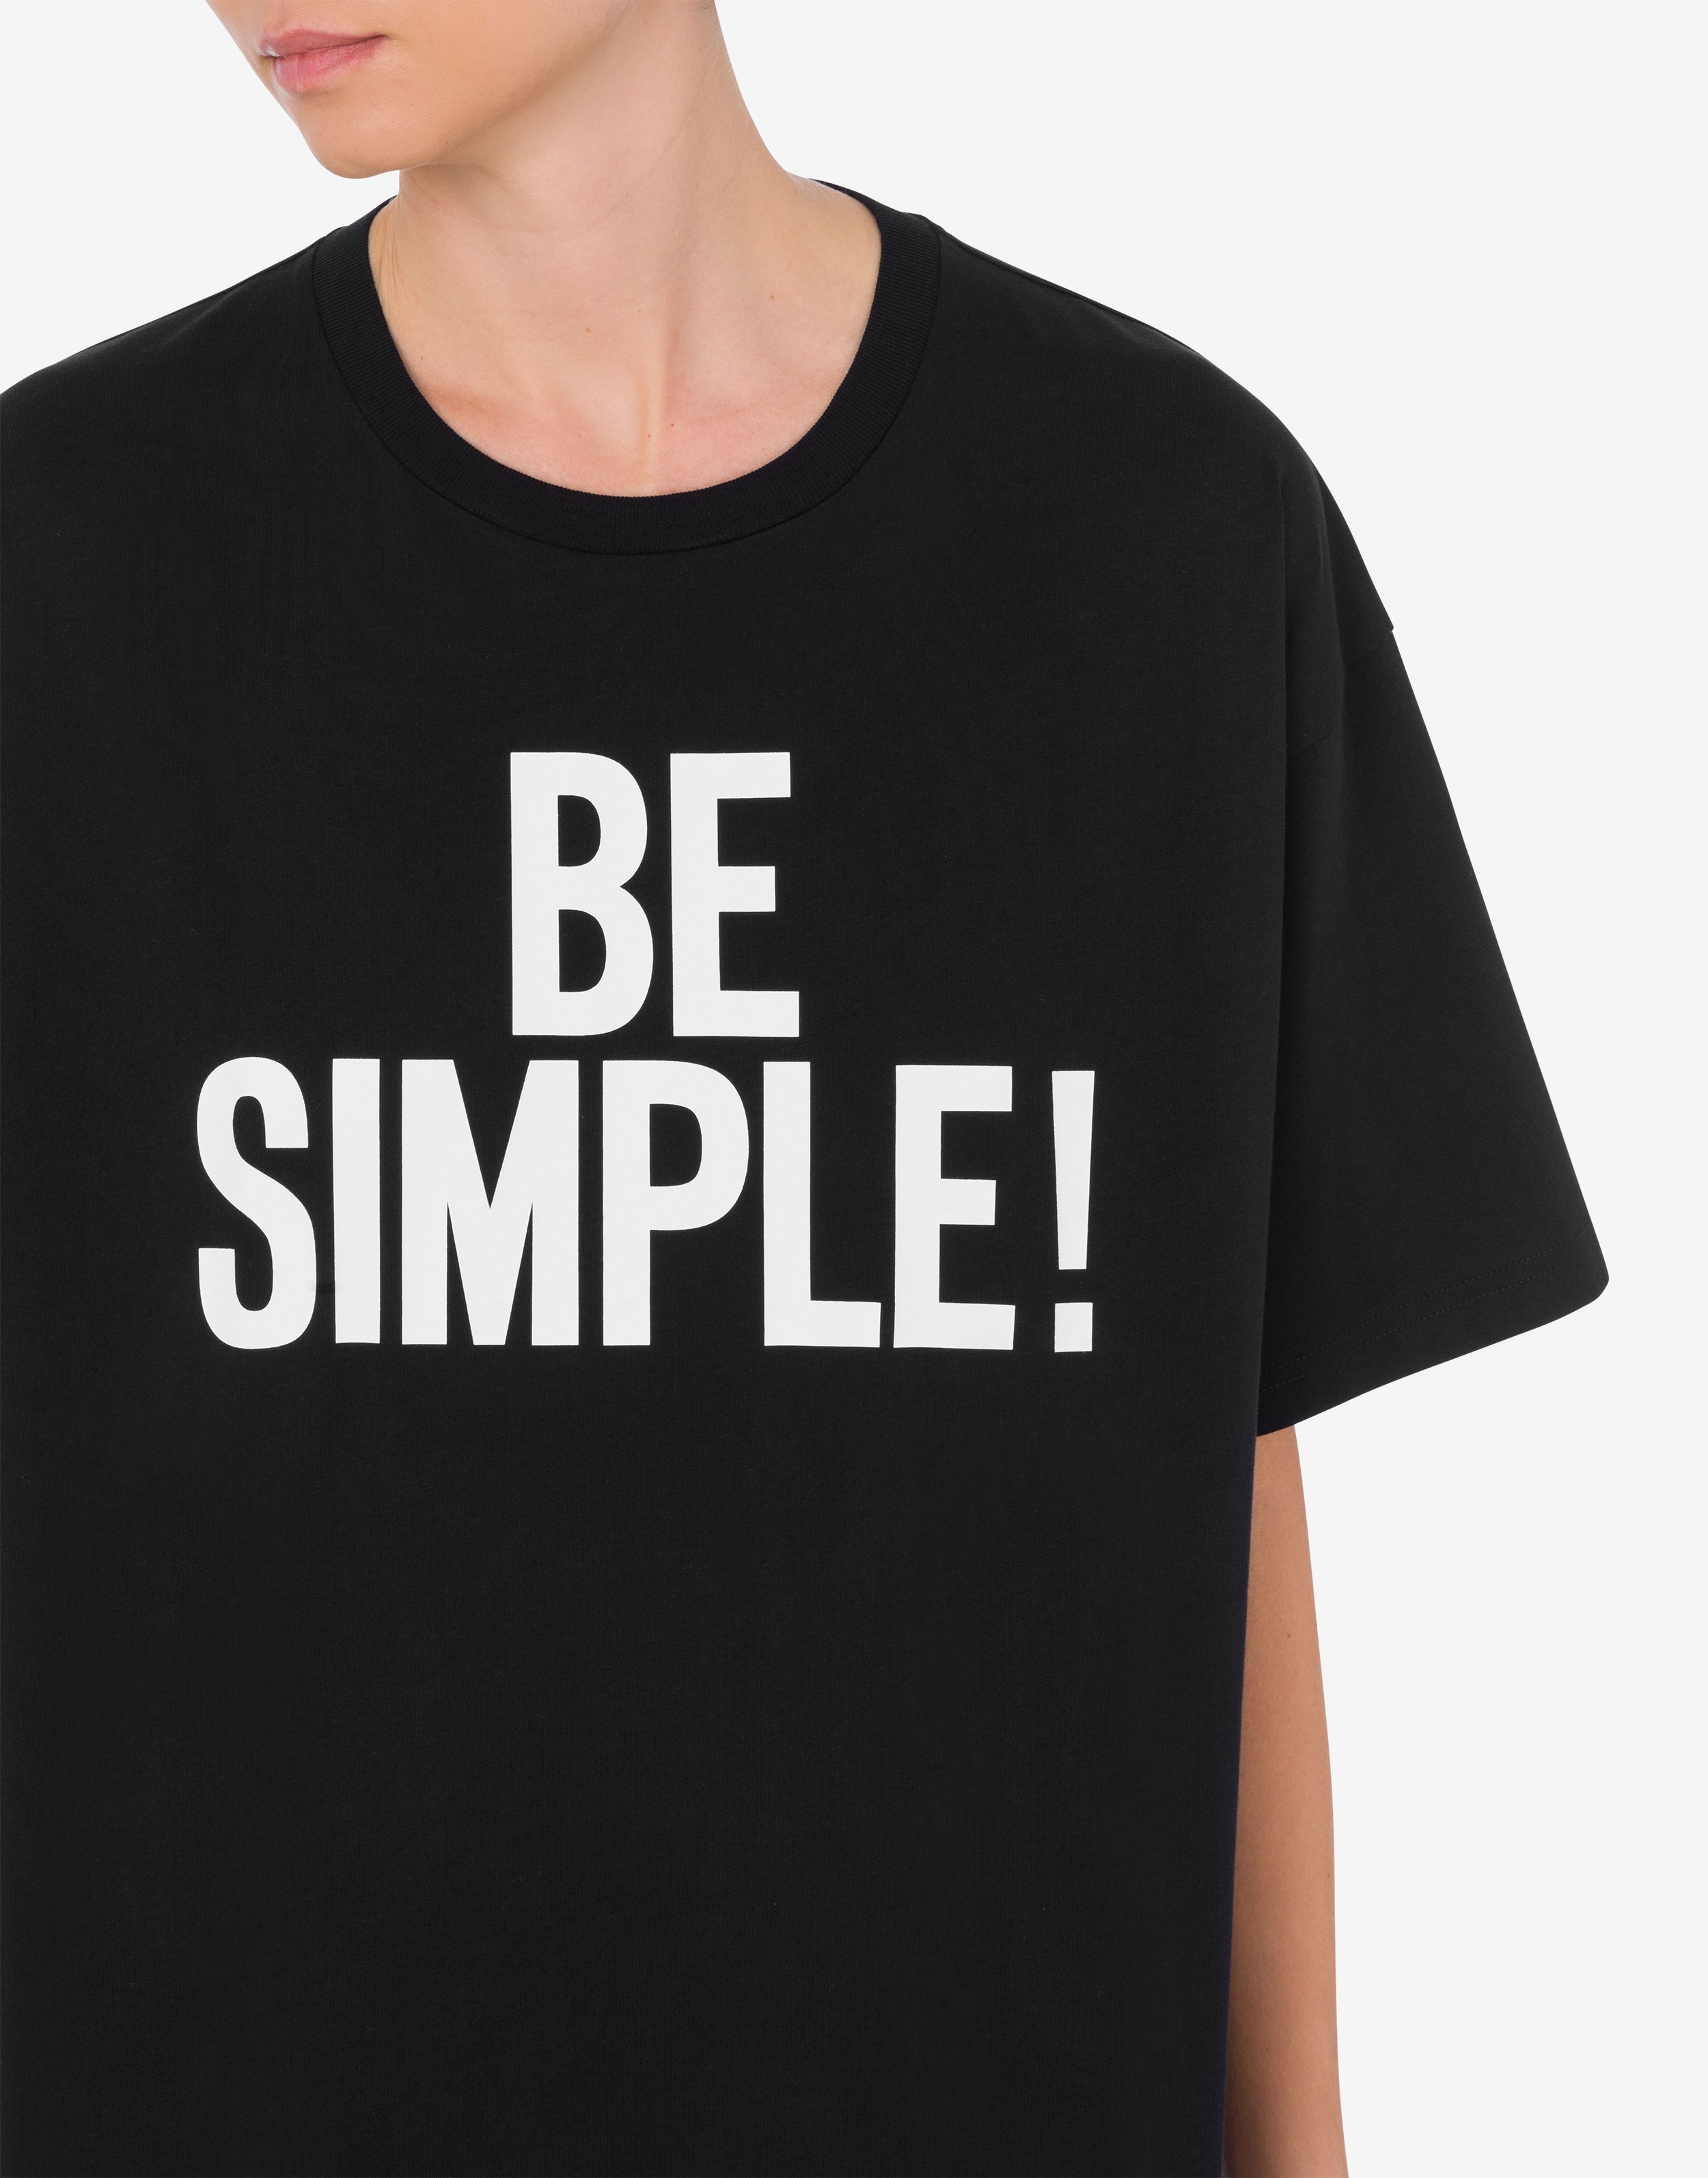 BE SIMPLE! JERSEY T-SHIRT - 4